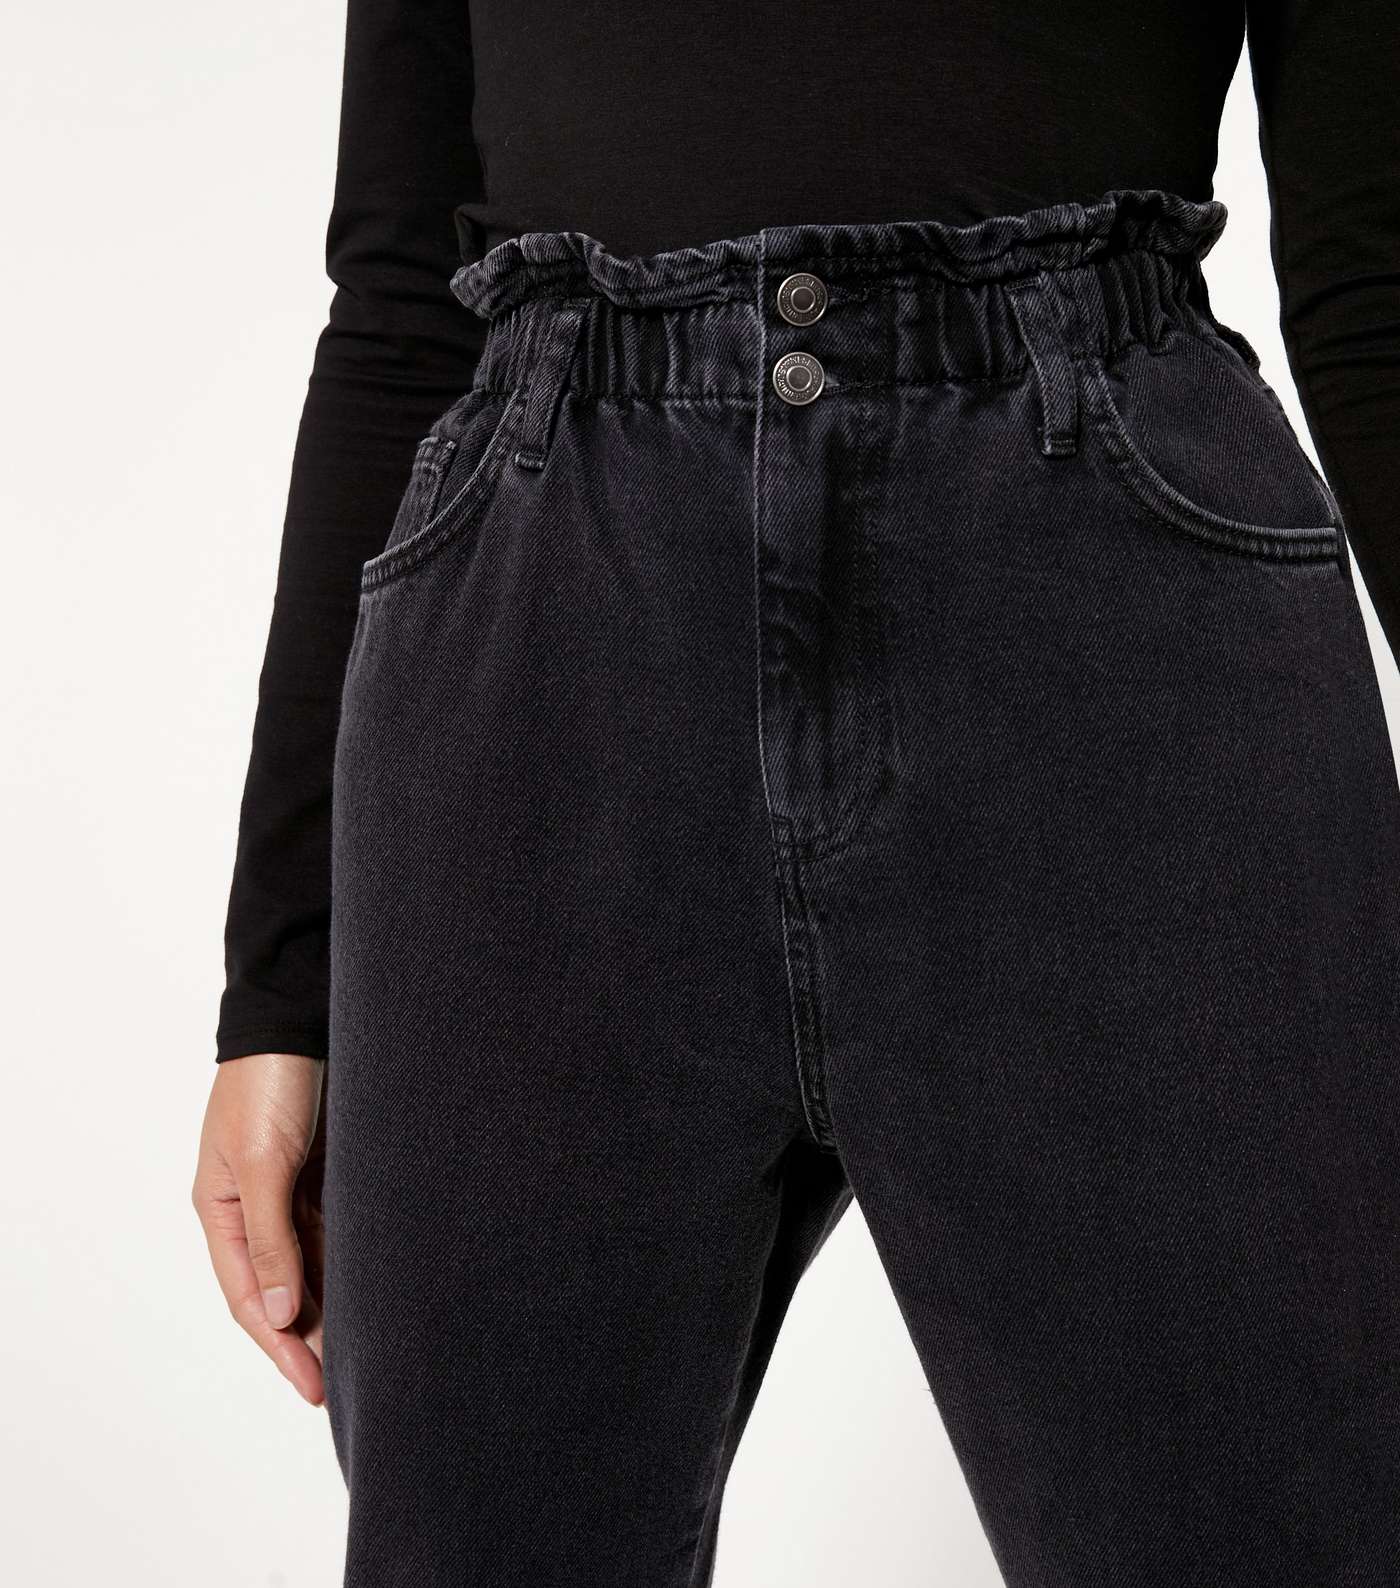 Black Elasticated High Waist Dayna Tapered Jeans Image 4